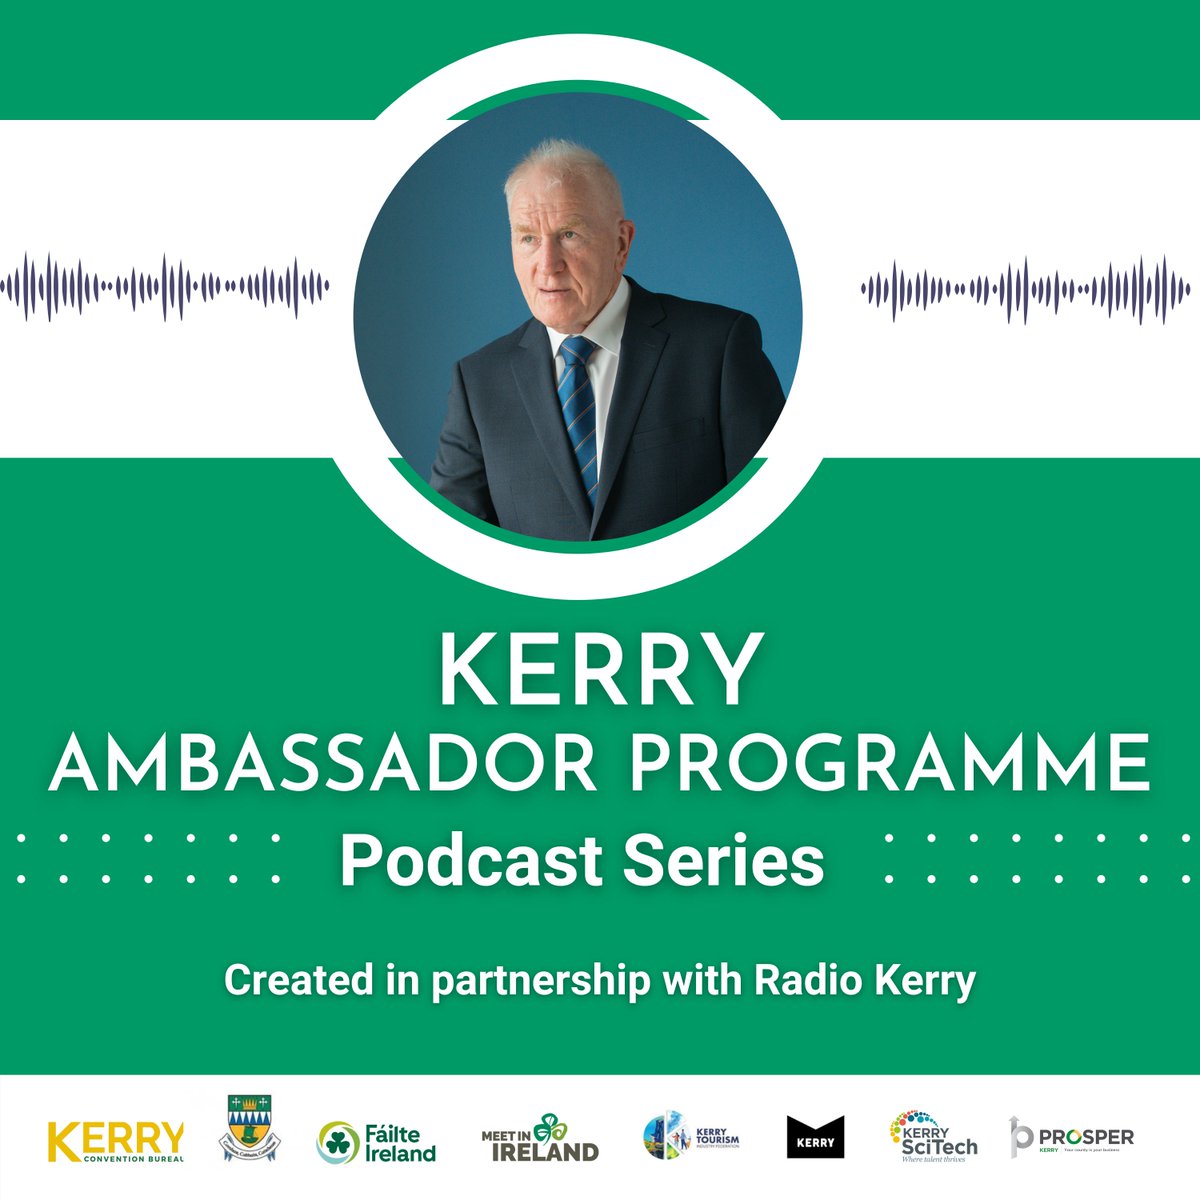 The #KerryAmbassador Programme Podcast Series is created in partnership w/@radiokerry & presented by @InBusinessRK 🎙️ Episode #7 features @JimmyDeenihanTD, Chair of @MTU_ie talking about upcoming @businessposthq Global Economic Summit ☘️ Listen here 🎧radiokerry.ie/podcasts/kerry…